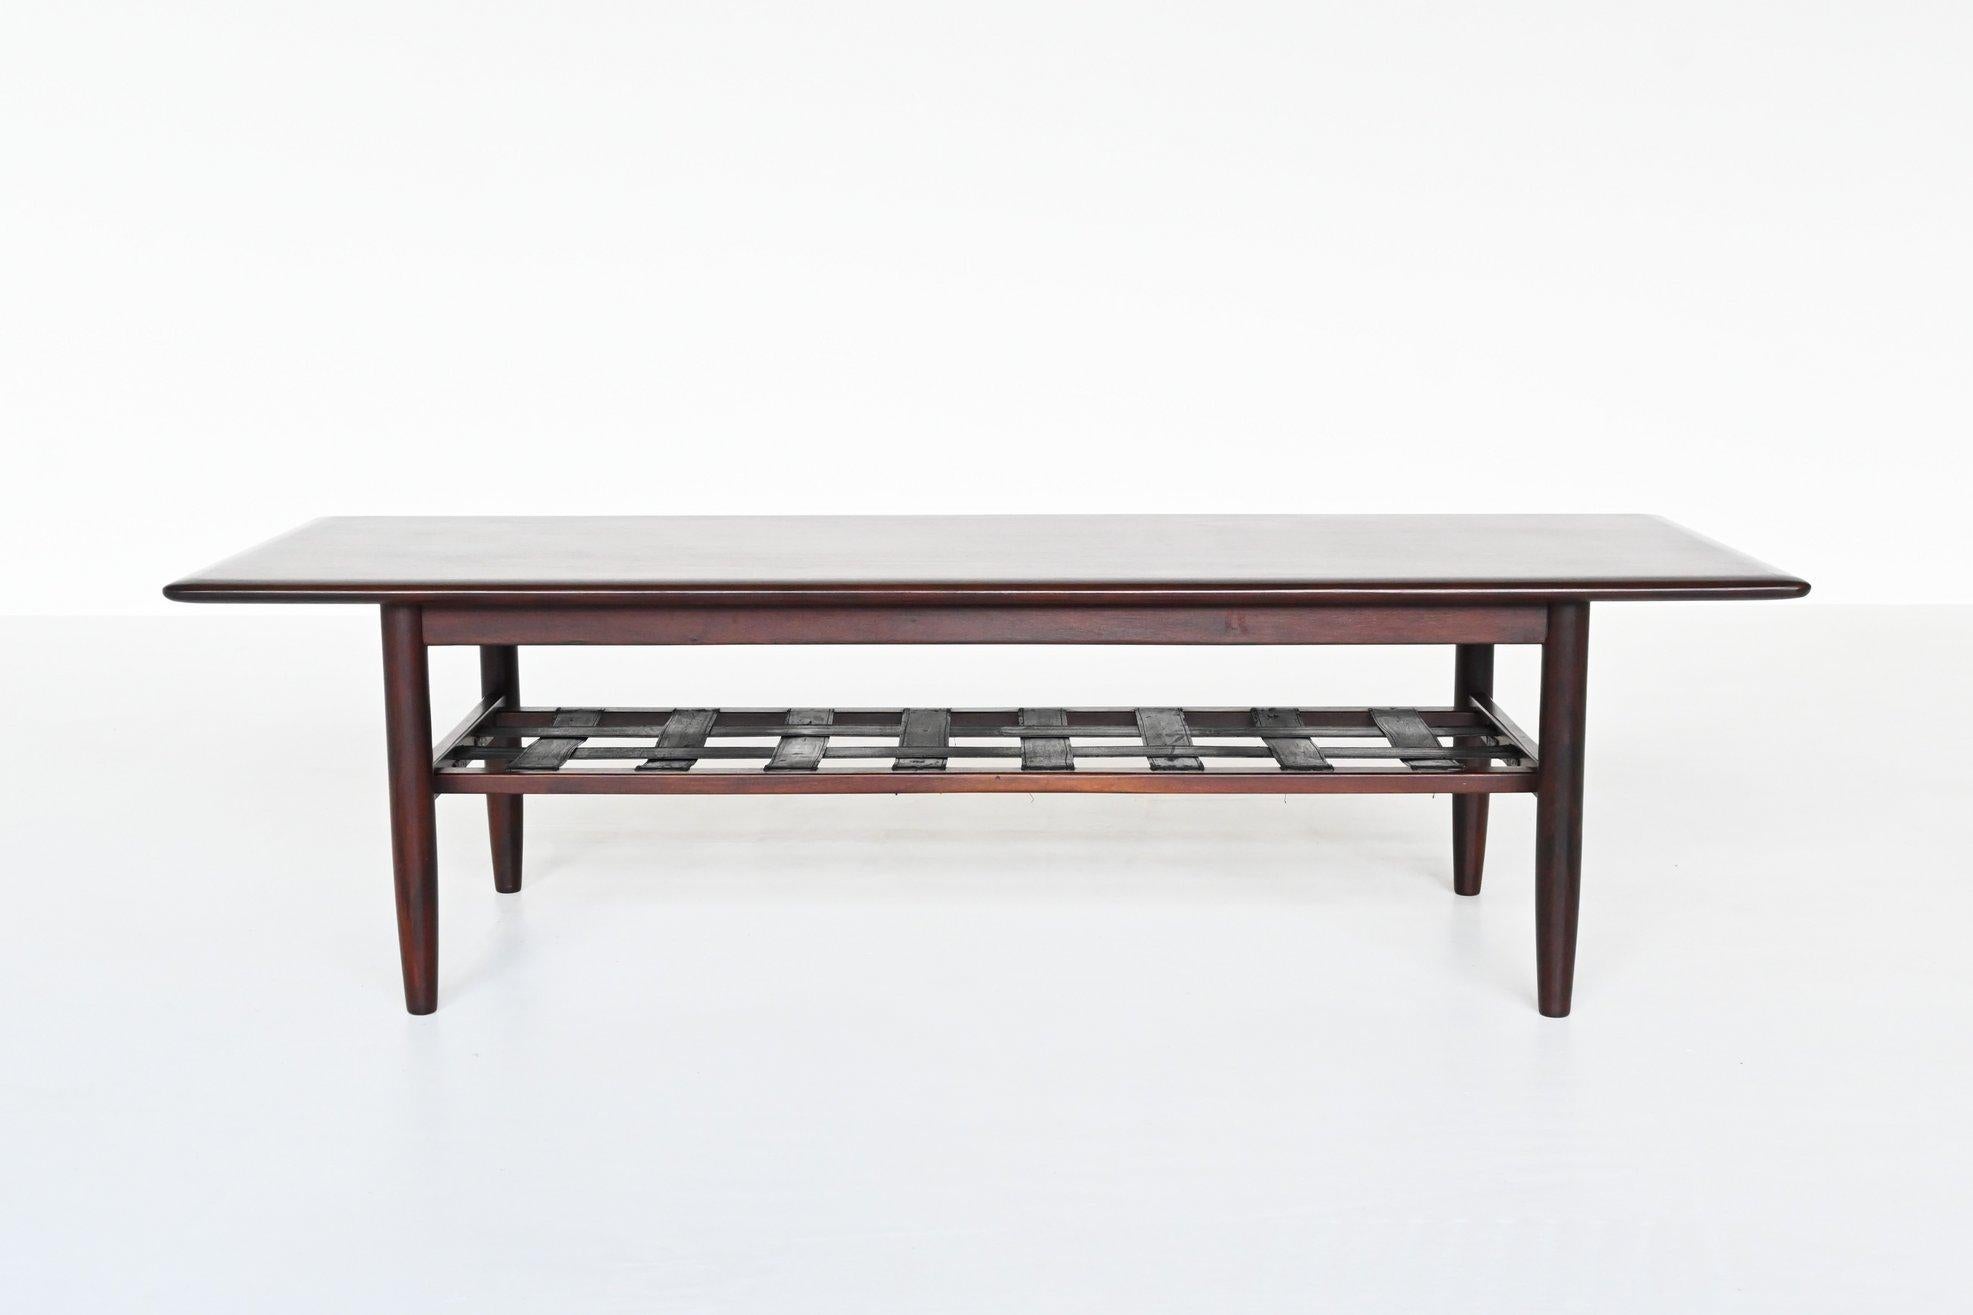 Beautiful coffee table manufactured by Topform, The Netherlands 1960. This high quality rosewood coffee table has solid legs and a veneered top with a leather strap magazine rack as second storage level. It is long, stable and quite heavy. This